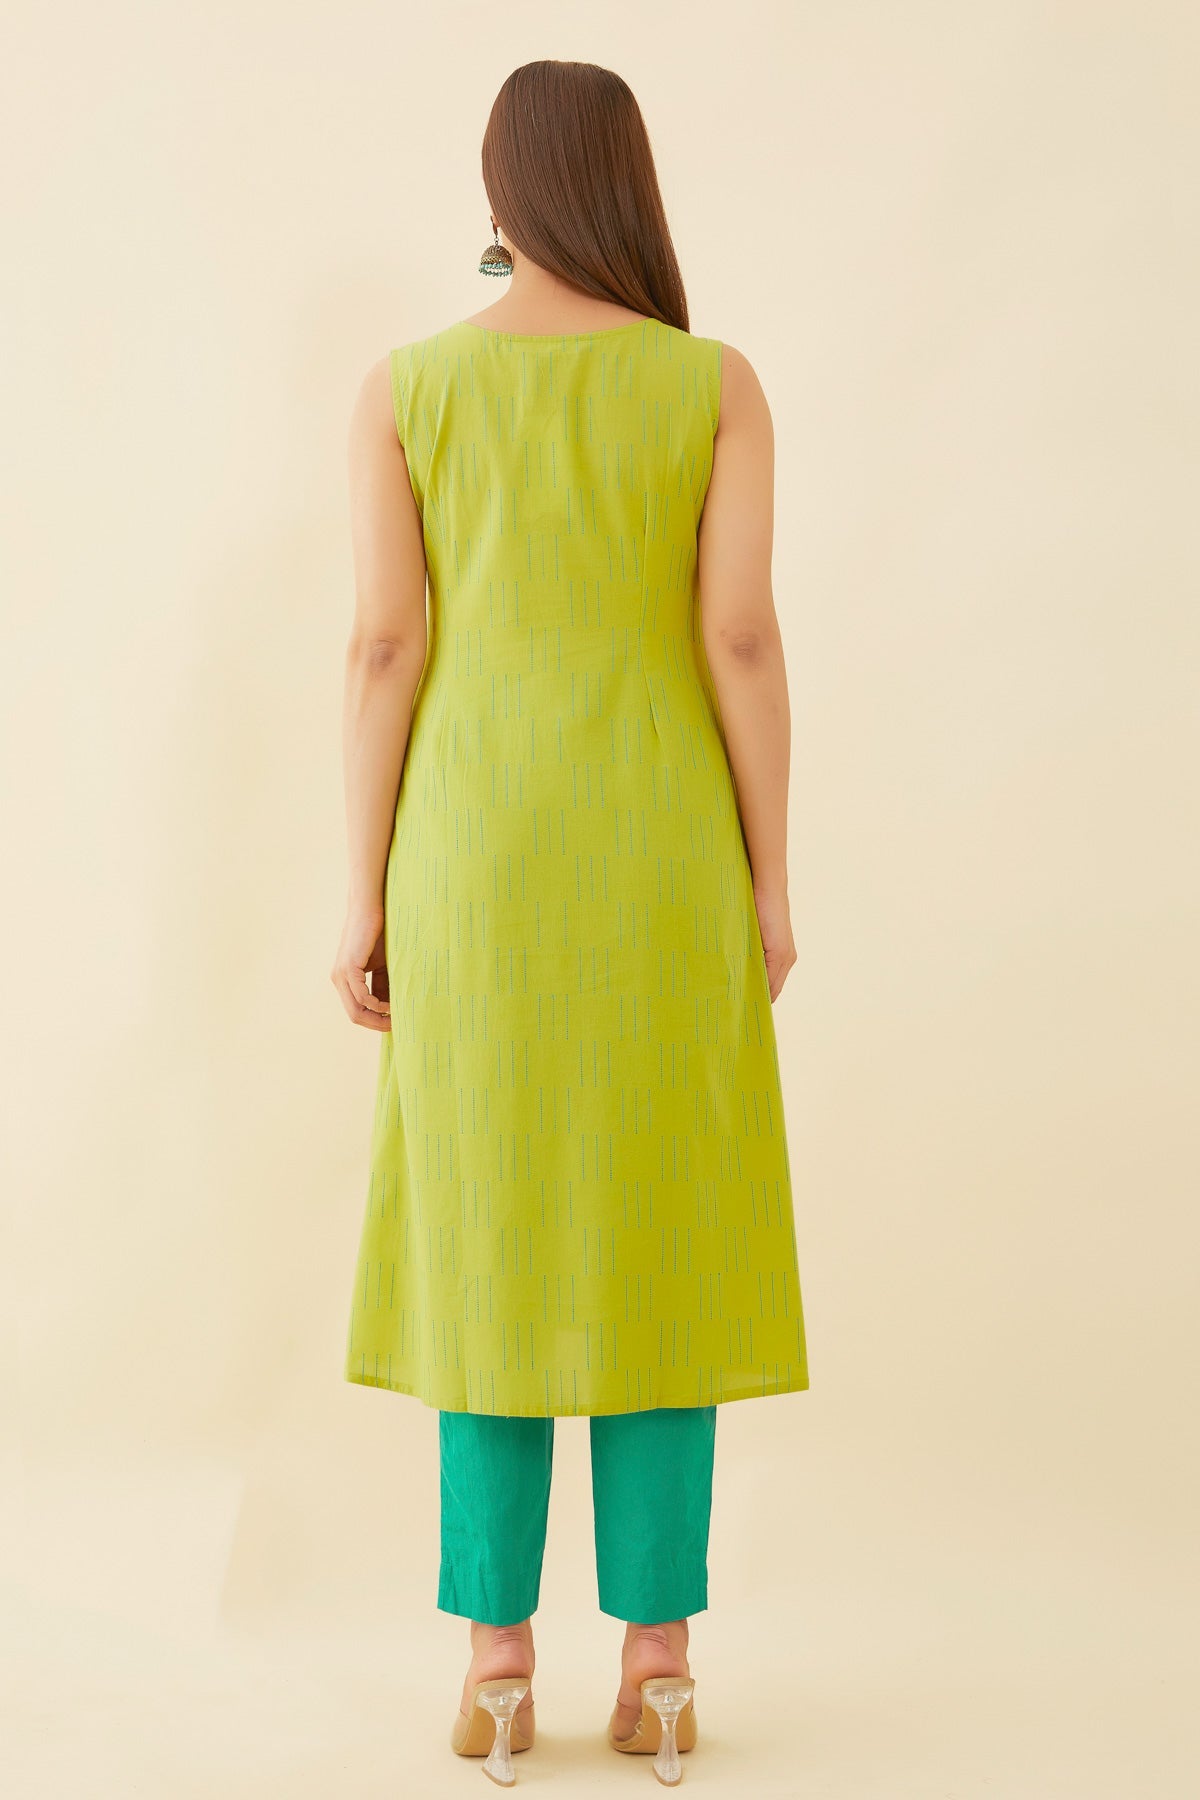 All Over Geometric Motif Contrast Embroidered A-Line Kurta -  Green